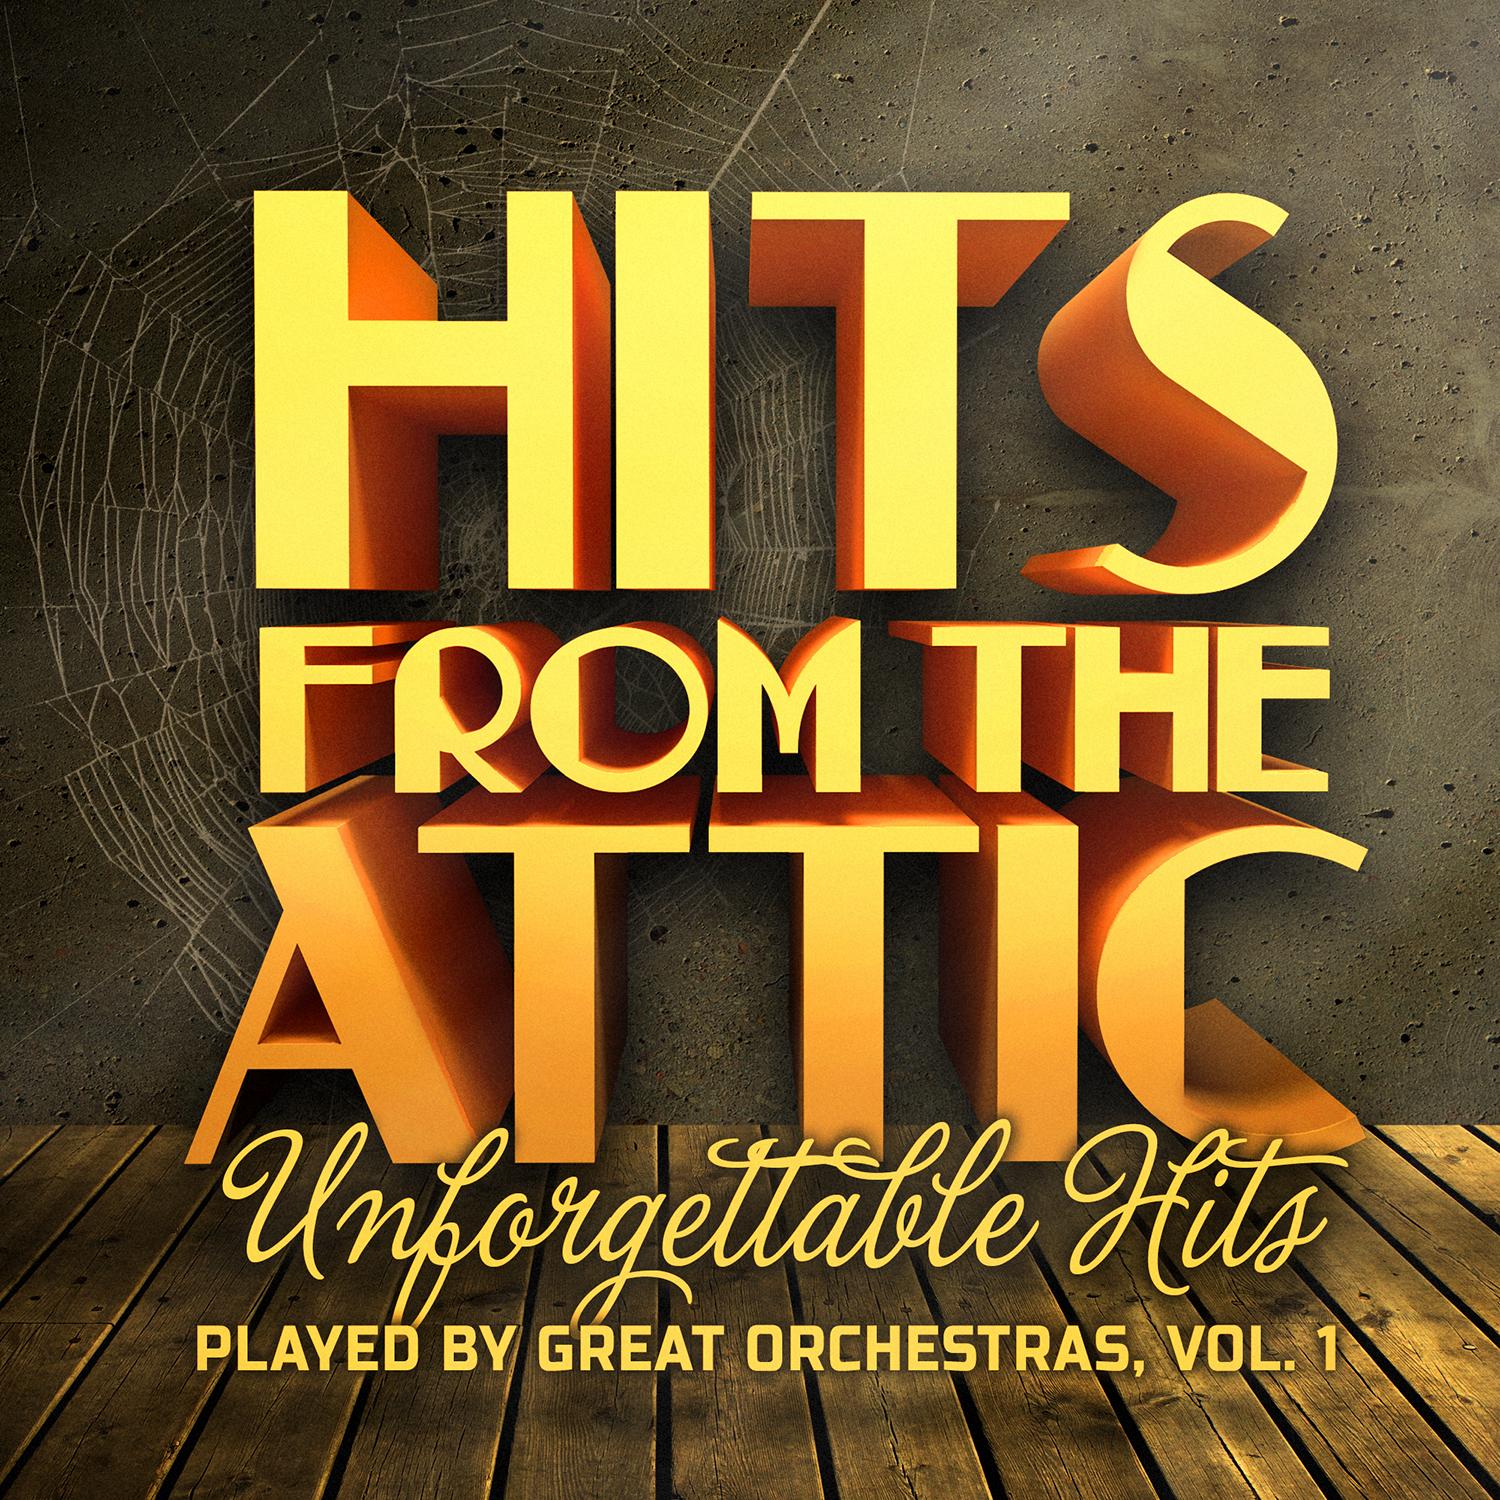 Hits from the Attic - Unforgettable Hits Played by Great Orchestras, Vol. 1